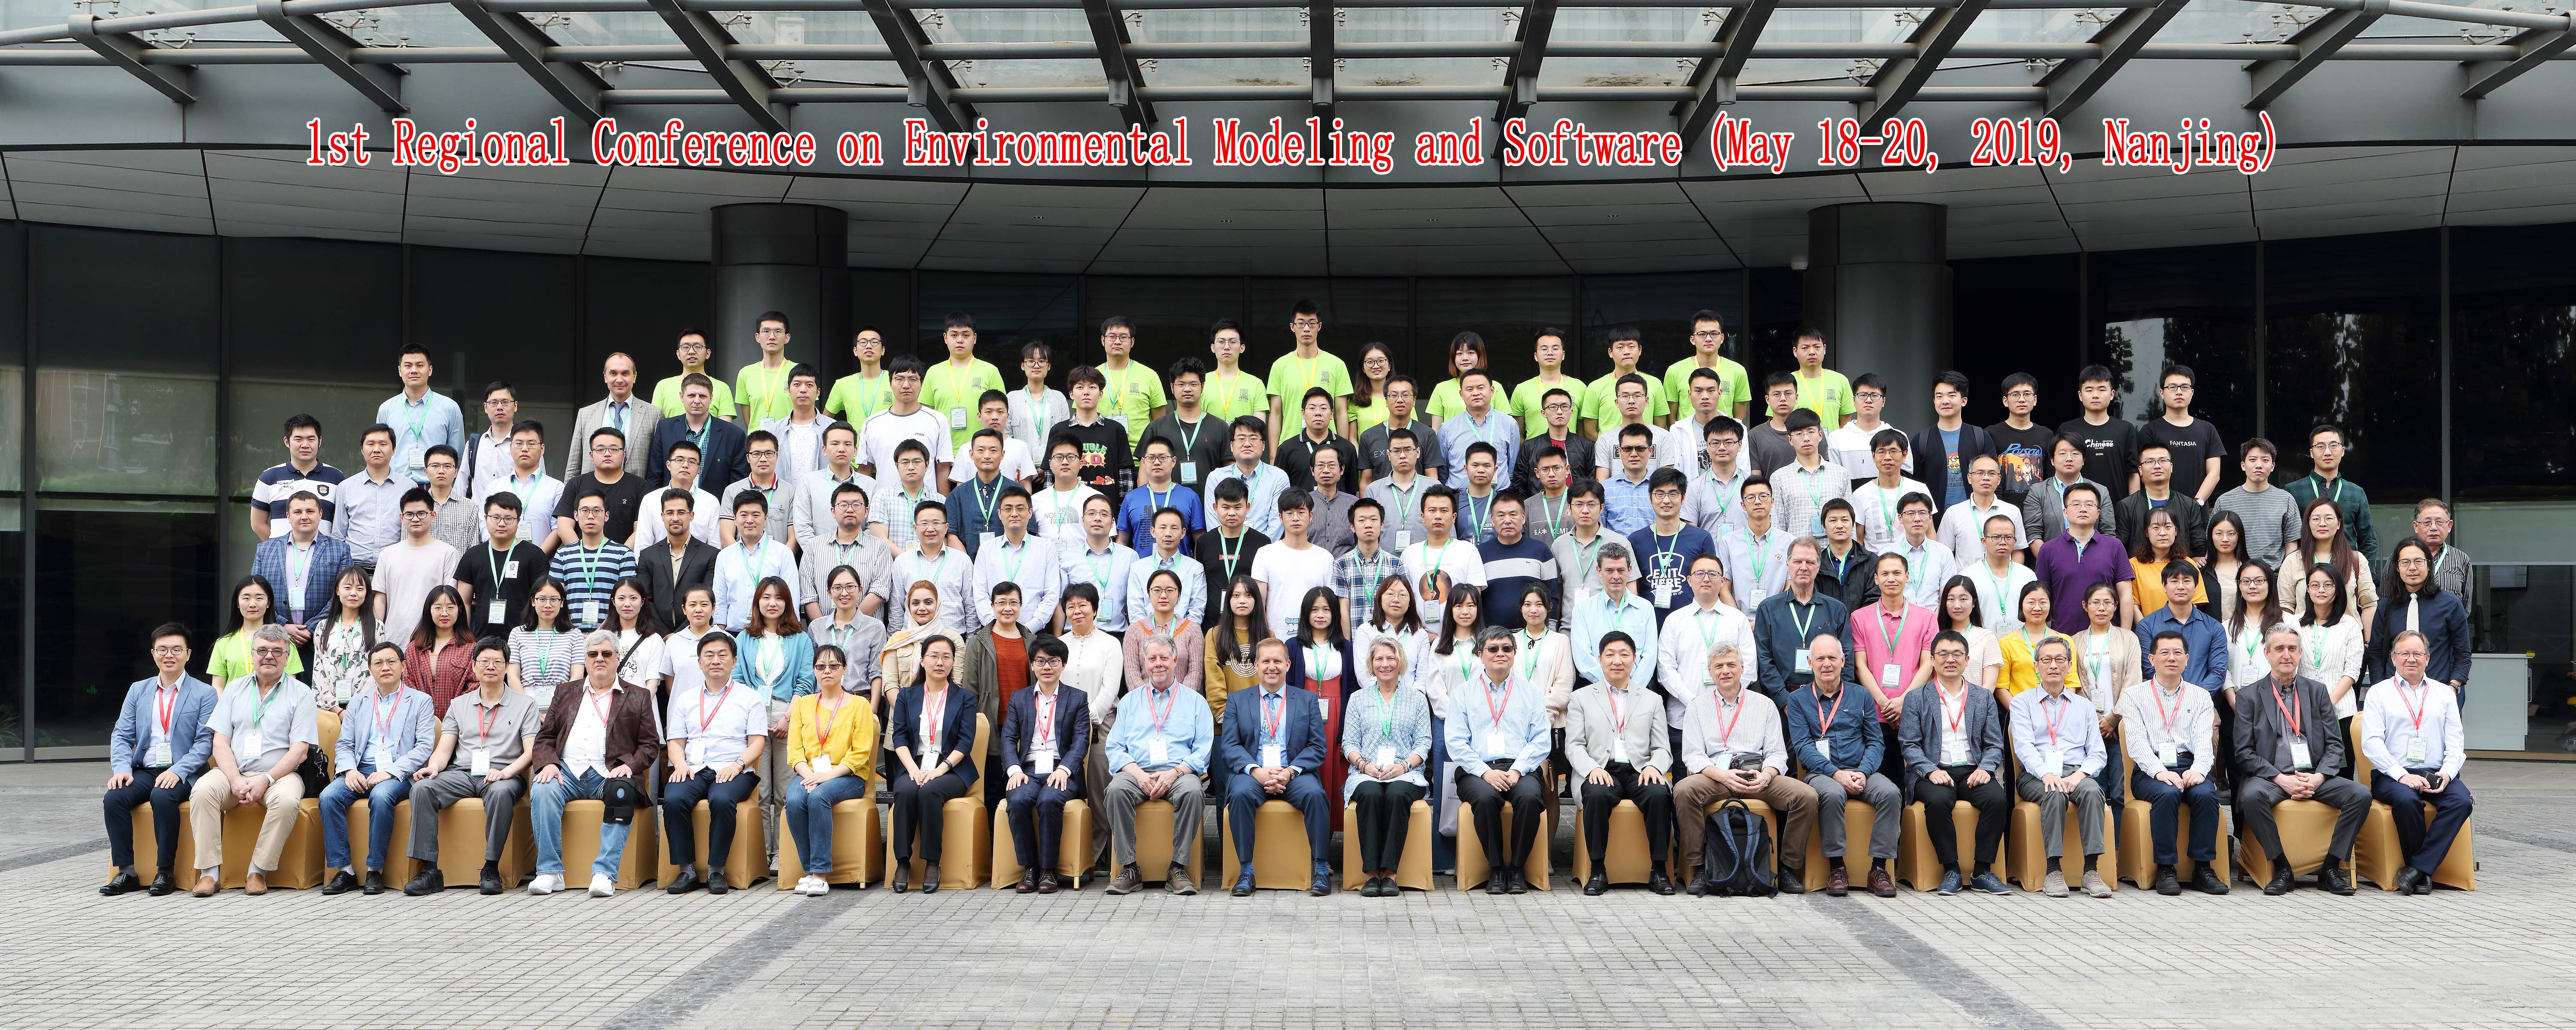 iEMSs 2019 Regional Conference in Nanjing China